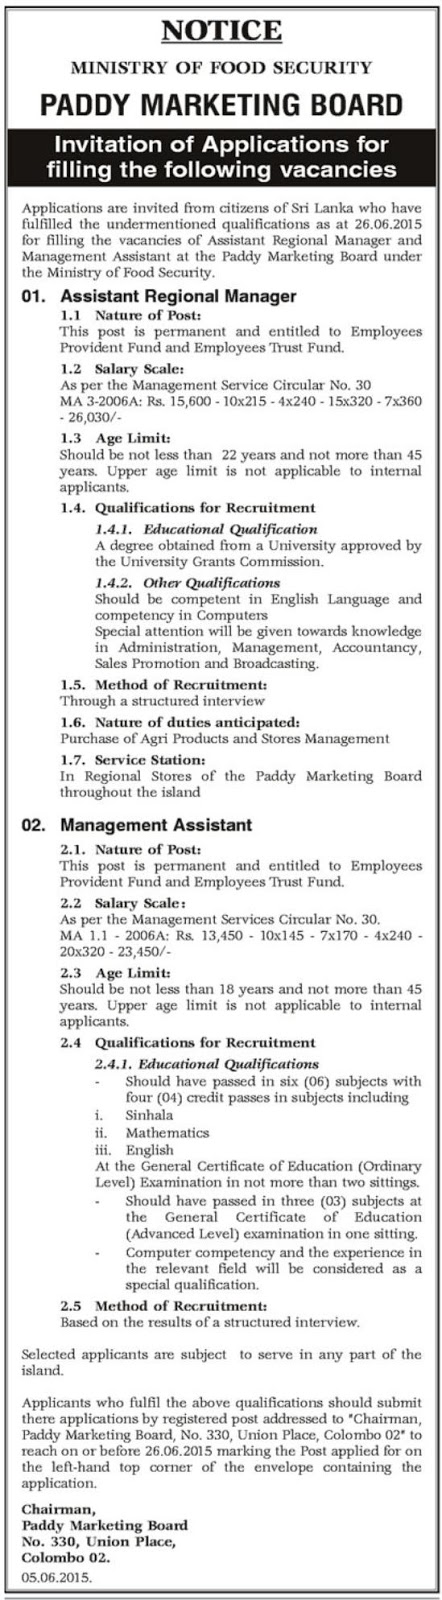 Assistant Regional Manager & Management Assistant Ministry of Food Security